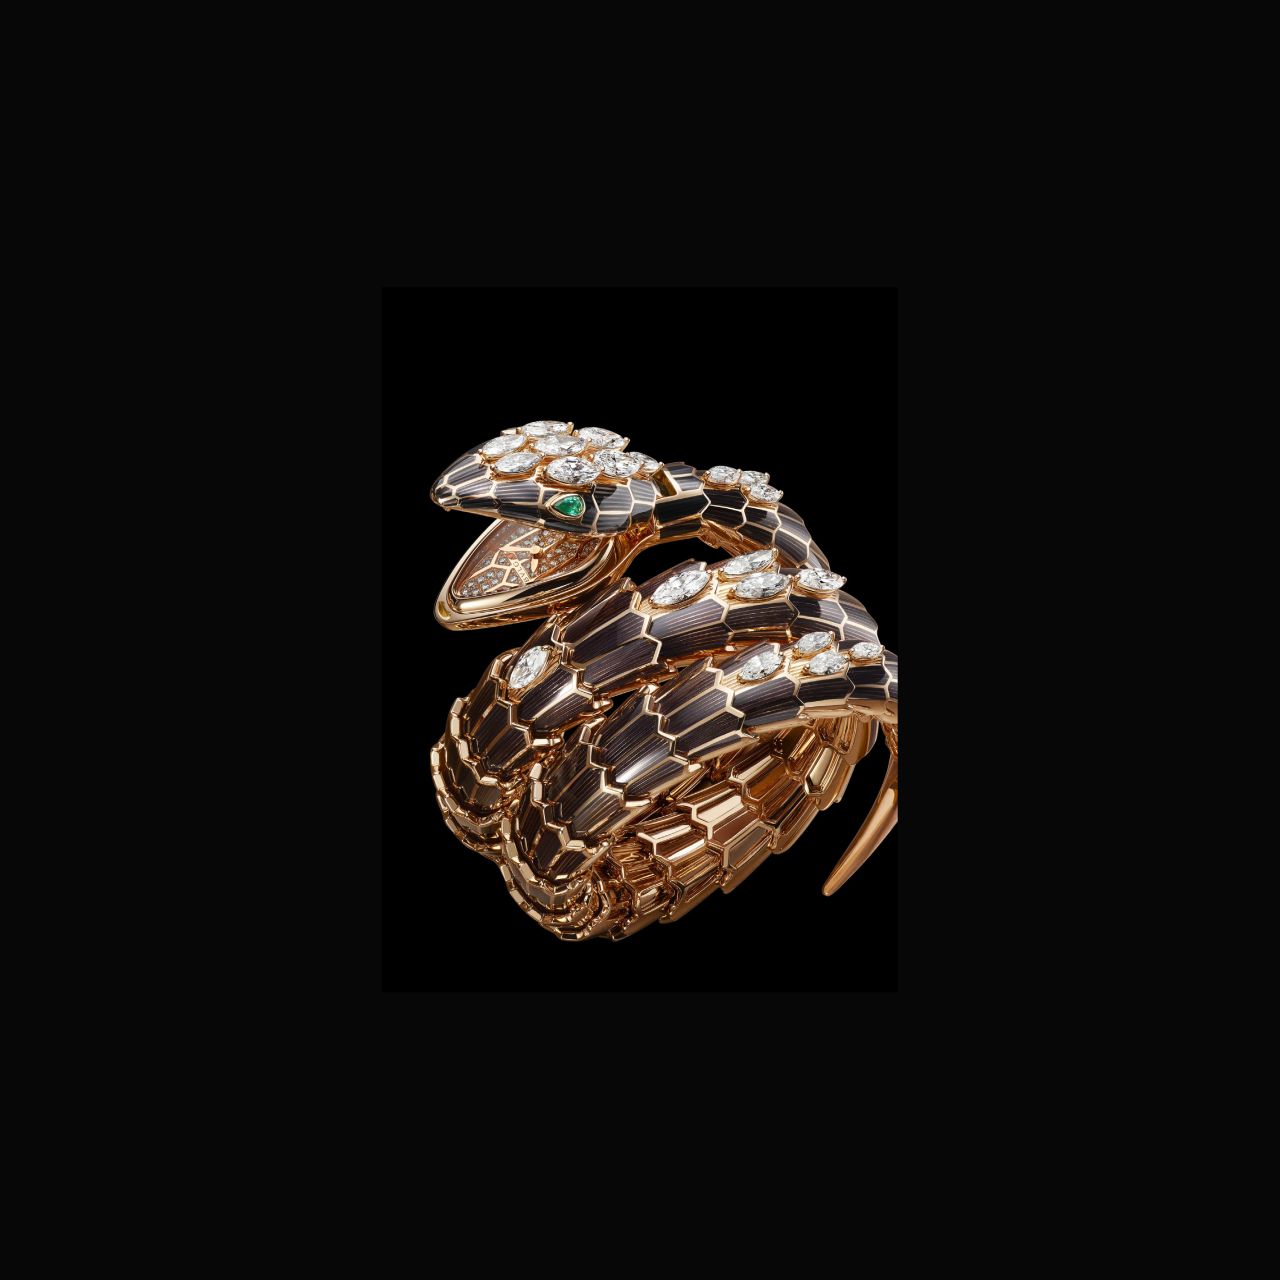 Bulgari's 2016 Serpenti Incantati, or snake bracelet, in which the timepiece is found secreted in the serpent's mouth, is an example of skilled design.